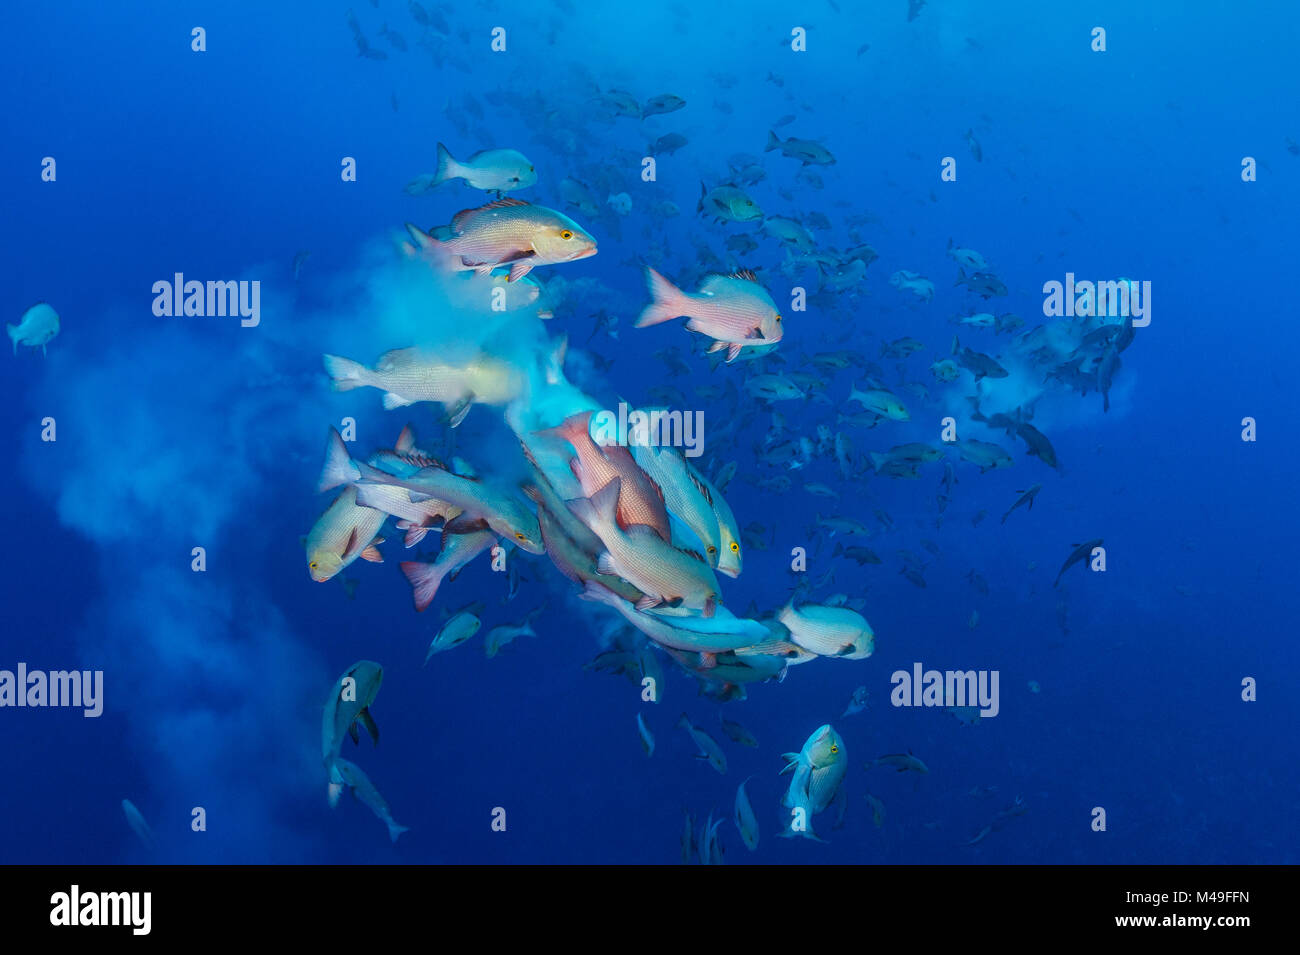 Bohar snappers (Lutjanus bohar) breaking up into smaller groups to spawn. The fish swim short arches above the main group as they release clouds of gametes.  Shark City, Ulong, Rock Islands, Palau. Tropical Pacific Ocean. Stock Photo